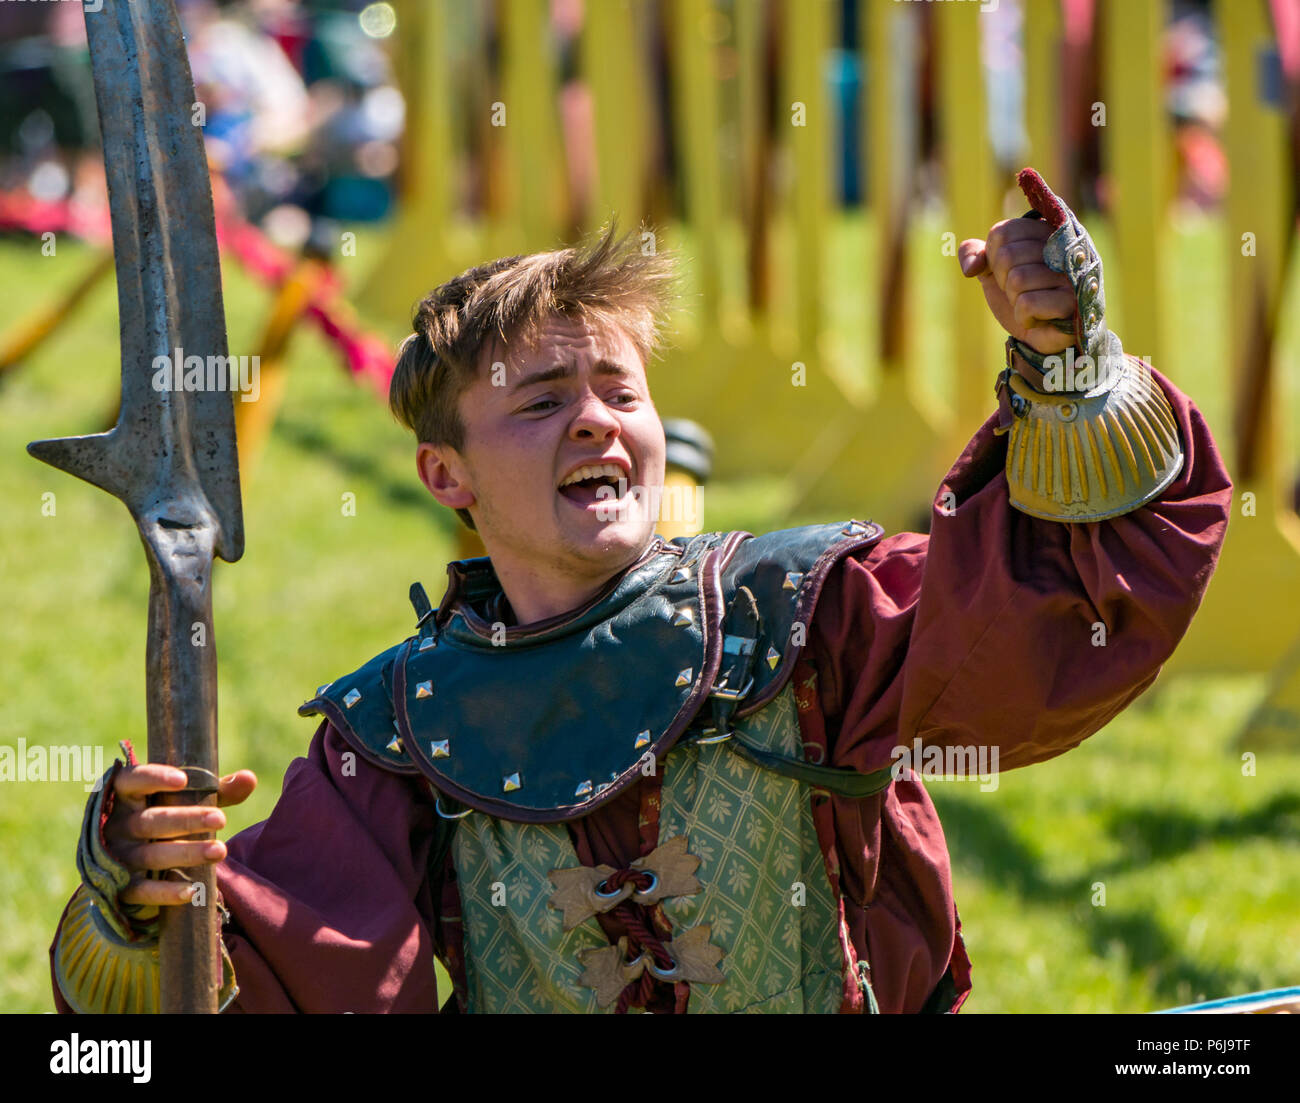 Jousting and Medieval Fair at Linlithgow Palace, Linlithgow, Scotland, United Kingdom, 30th June 2018. Historic Environment Scotland kick off their summer entertainment programme with a fabulous display of Medieval jousting in the grounds of the historic castle. The jousting is performed by Les Amis D'Onno equine stunt team. A knight cheers on the crowd with his sword raised Stock Photo